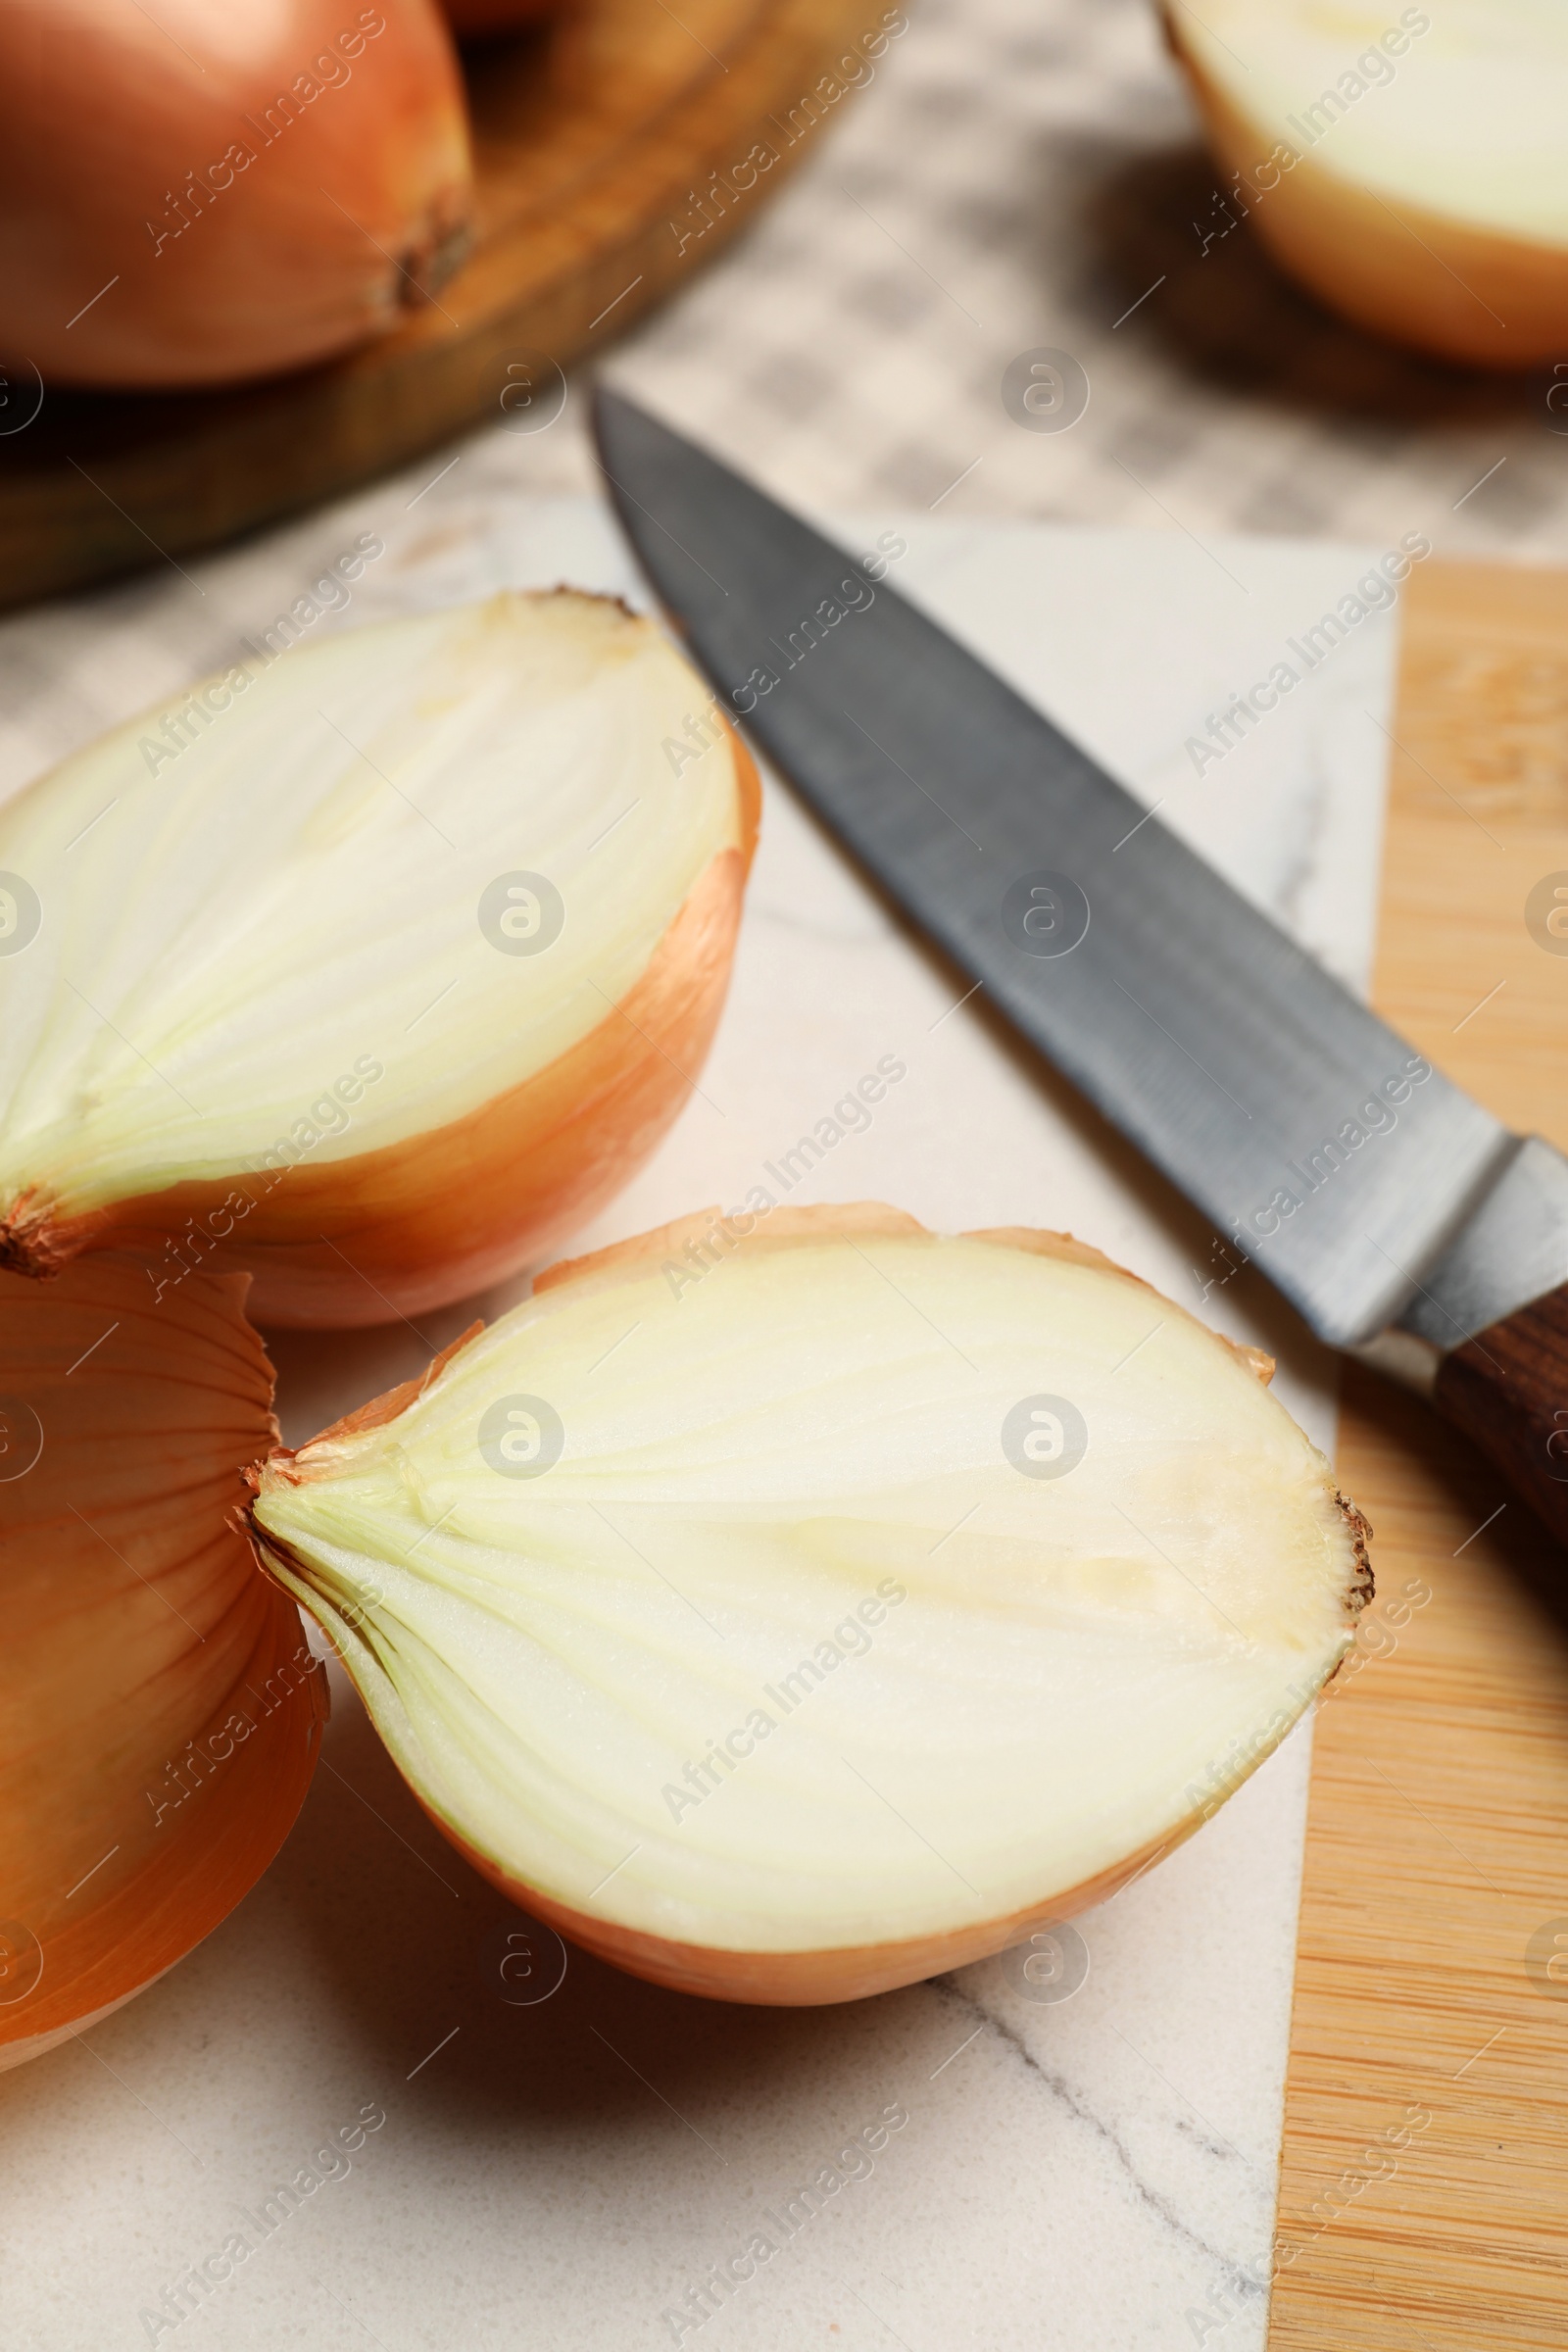 Photo of Whole and cut onions with knife on table, closeup